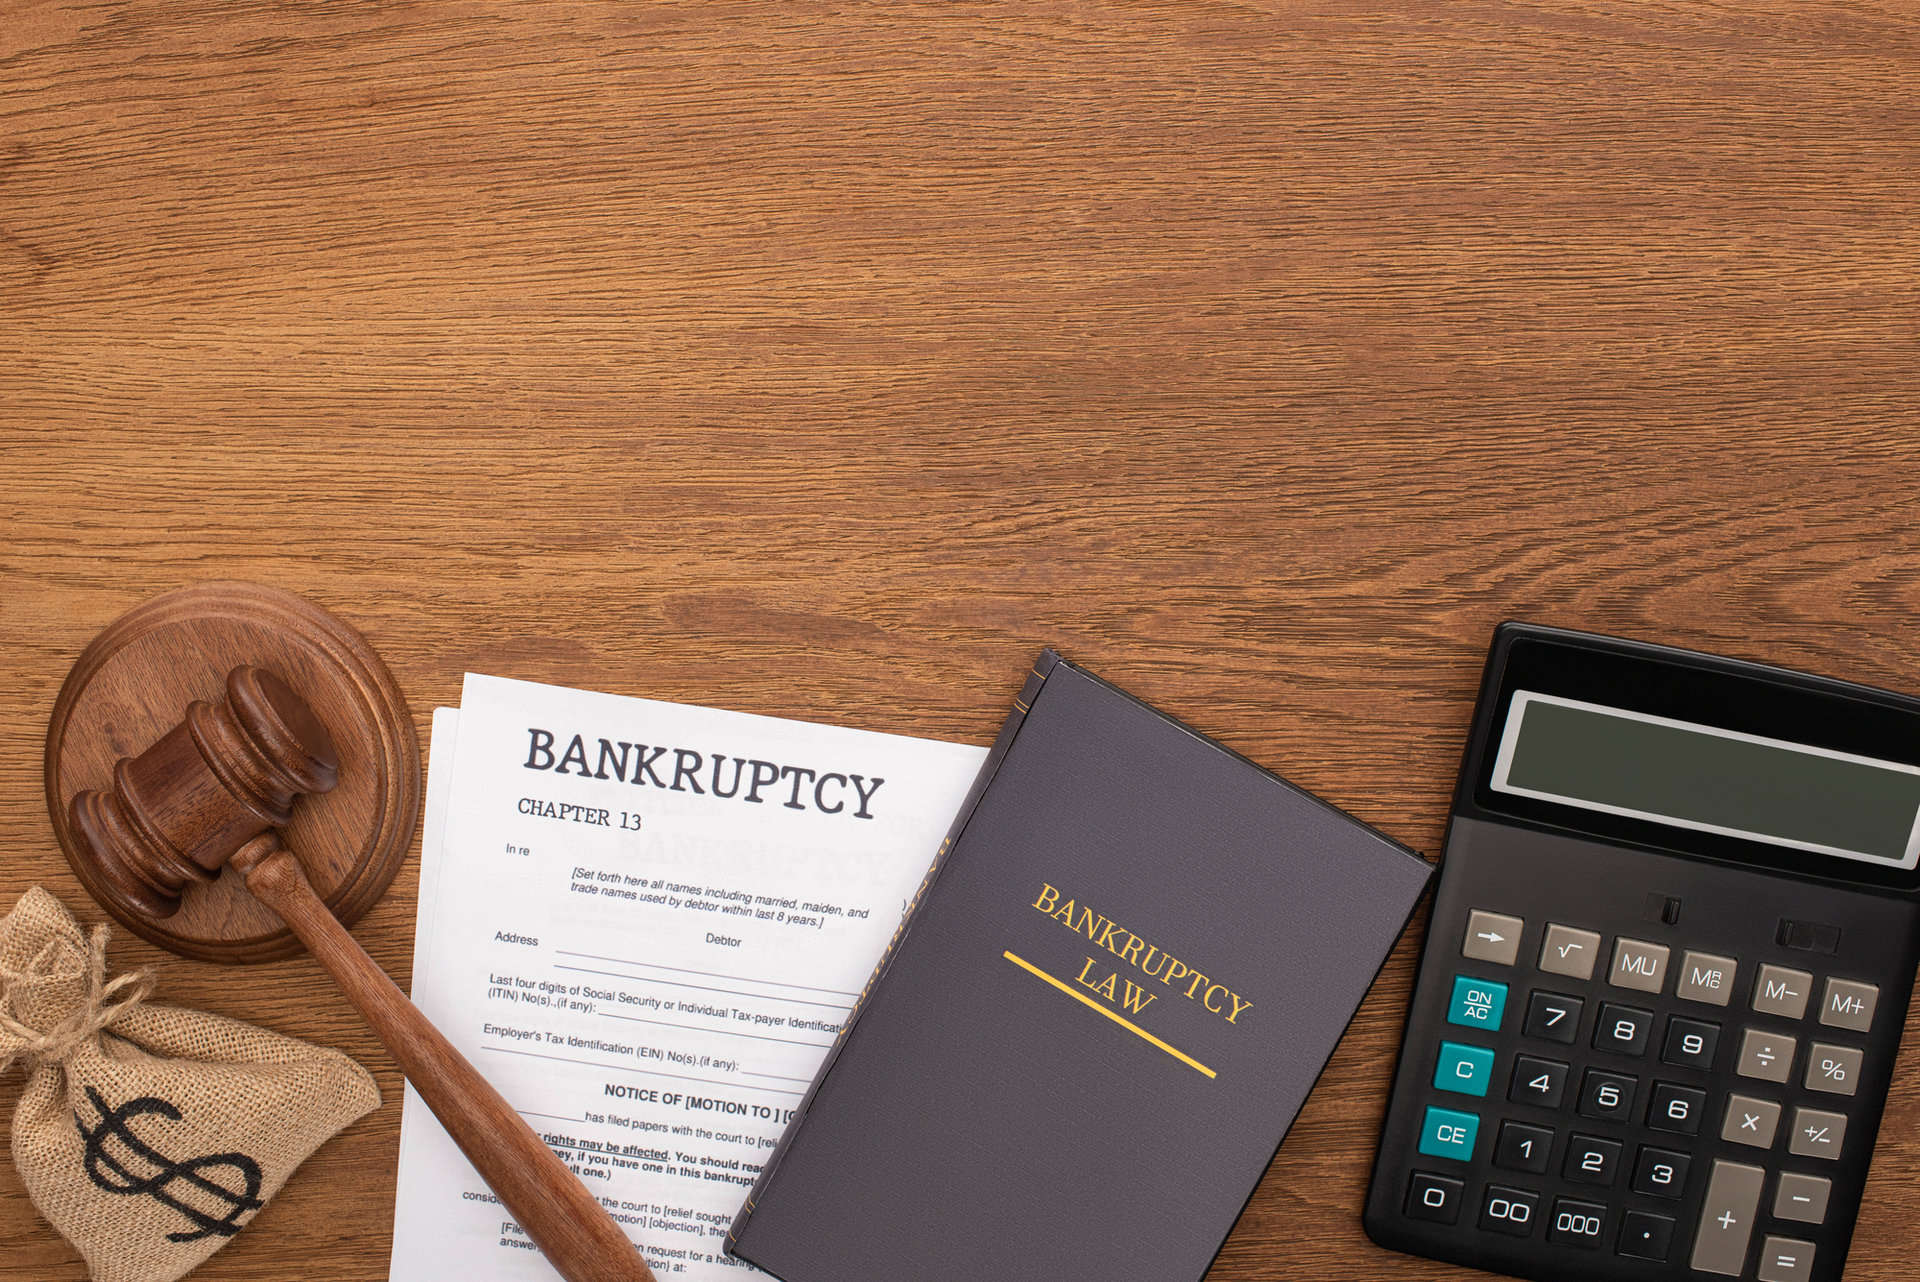 SEO for bankruptcy lawyers